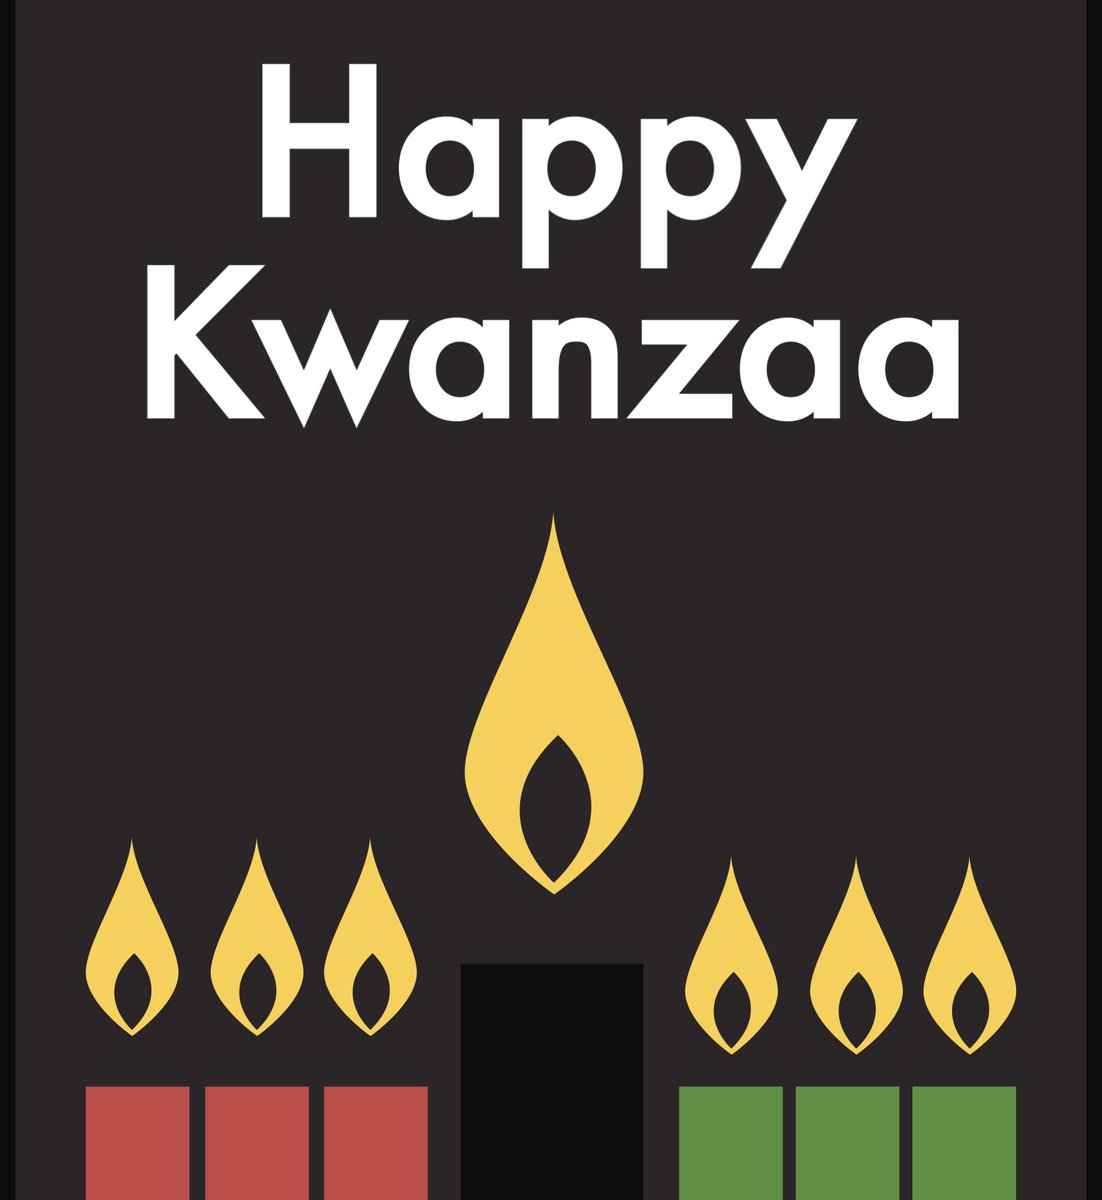 Happy Kwanzaa to those who celebrate! I am wishing you and your families peace and light this holiday season.